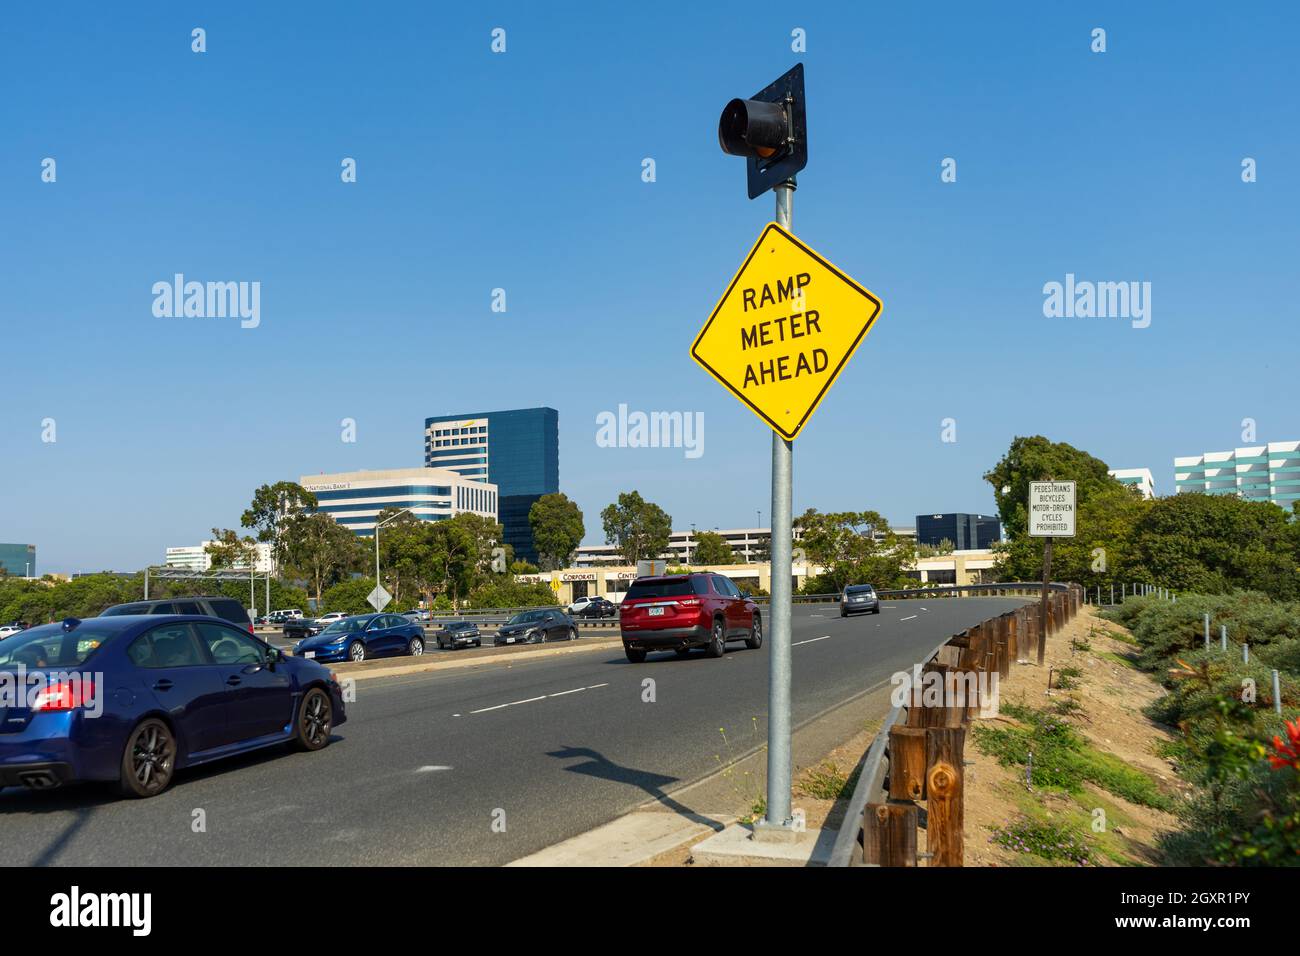 Irvine, CA, USA – August 16, 2021: Ramp Meter Ahead sign posted on the entrance to the 405 freeway in the Orange County city of Irvine, California. Stock Photo